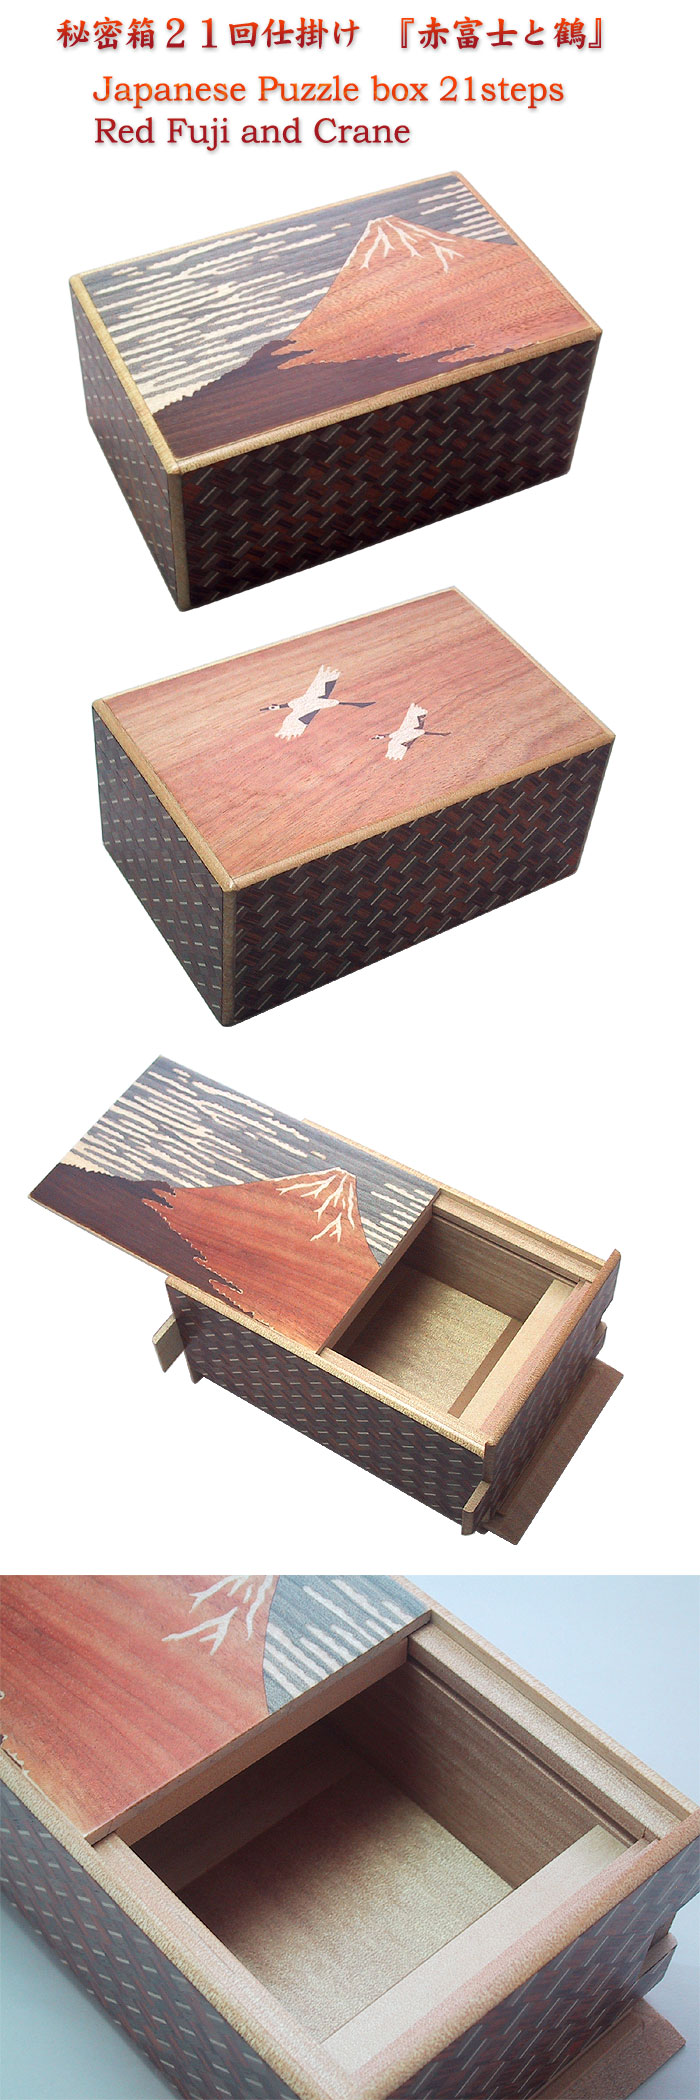 Japanese Puzzle box 21steps Red Fuji and Crane